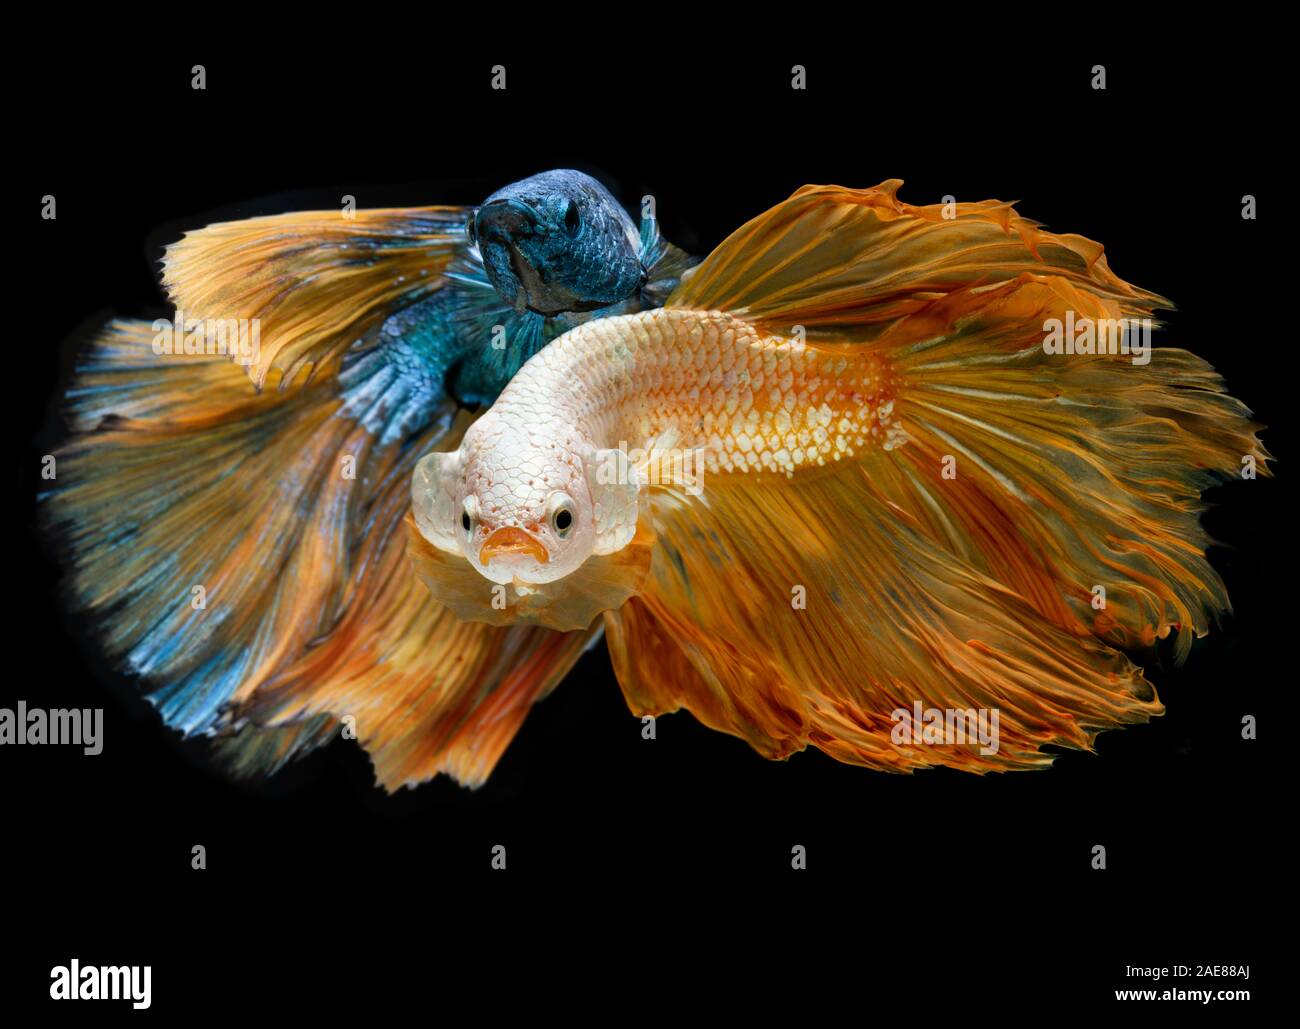 Silver gold and blue long half moon Betta fishes or Siamese fighting fish with black background. Stock Photo